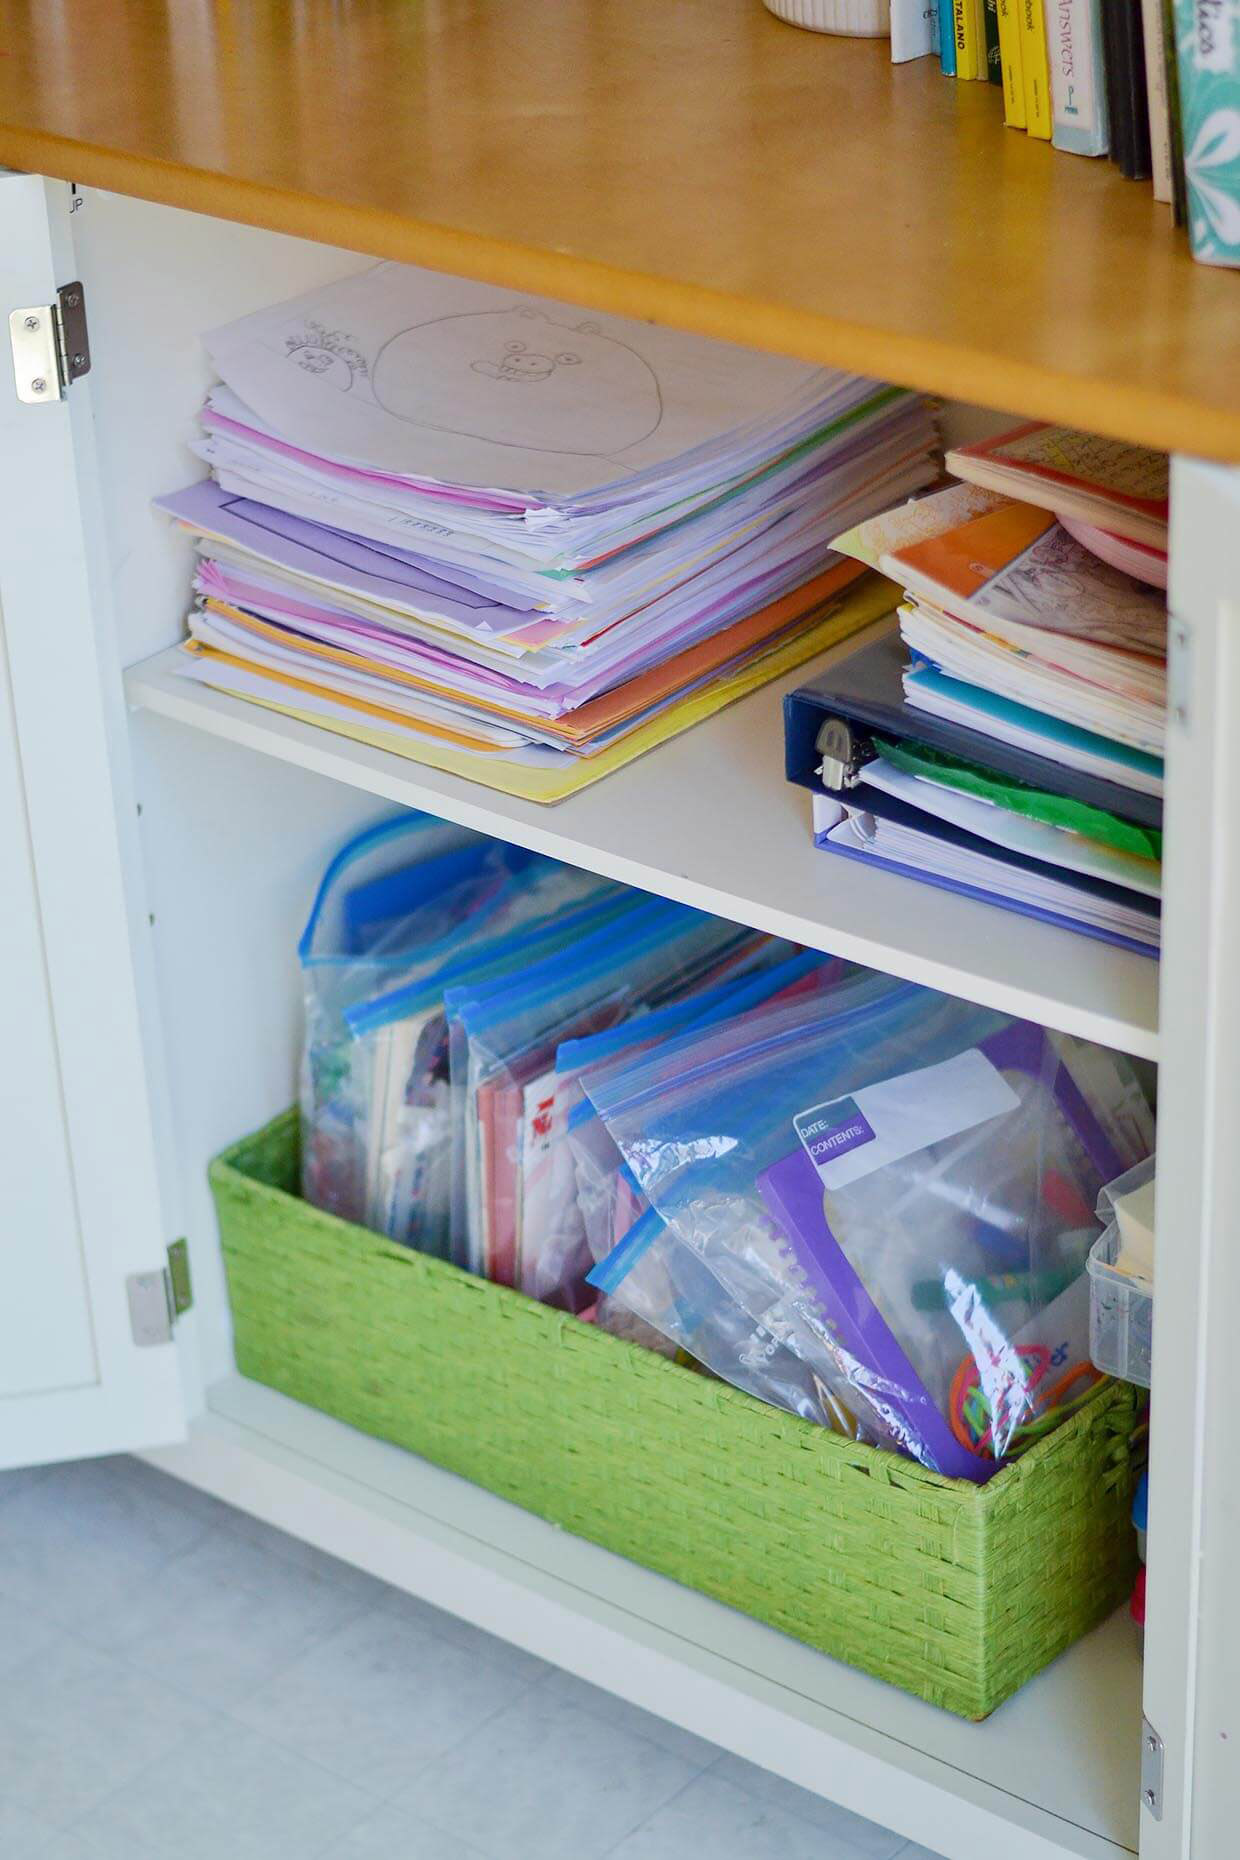 10 Simple Organizational Hacks for the New School Year - Abby Sasscer